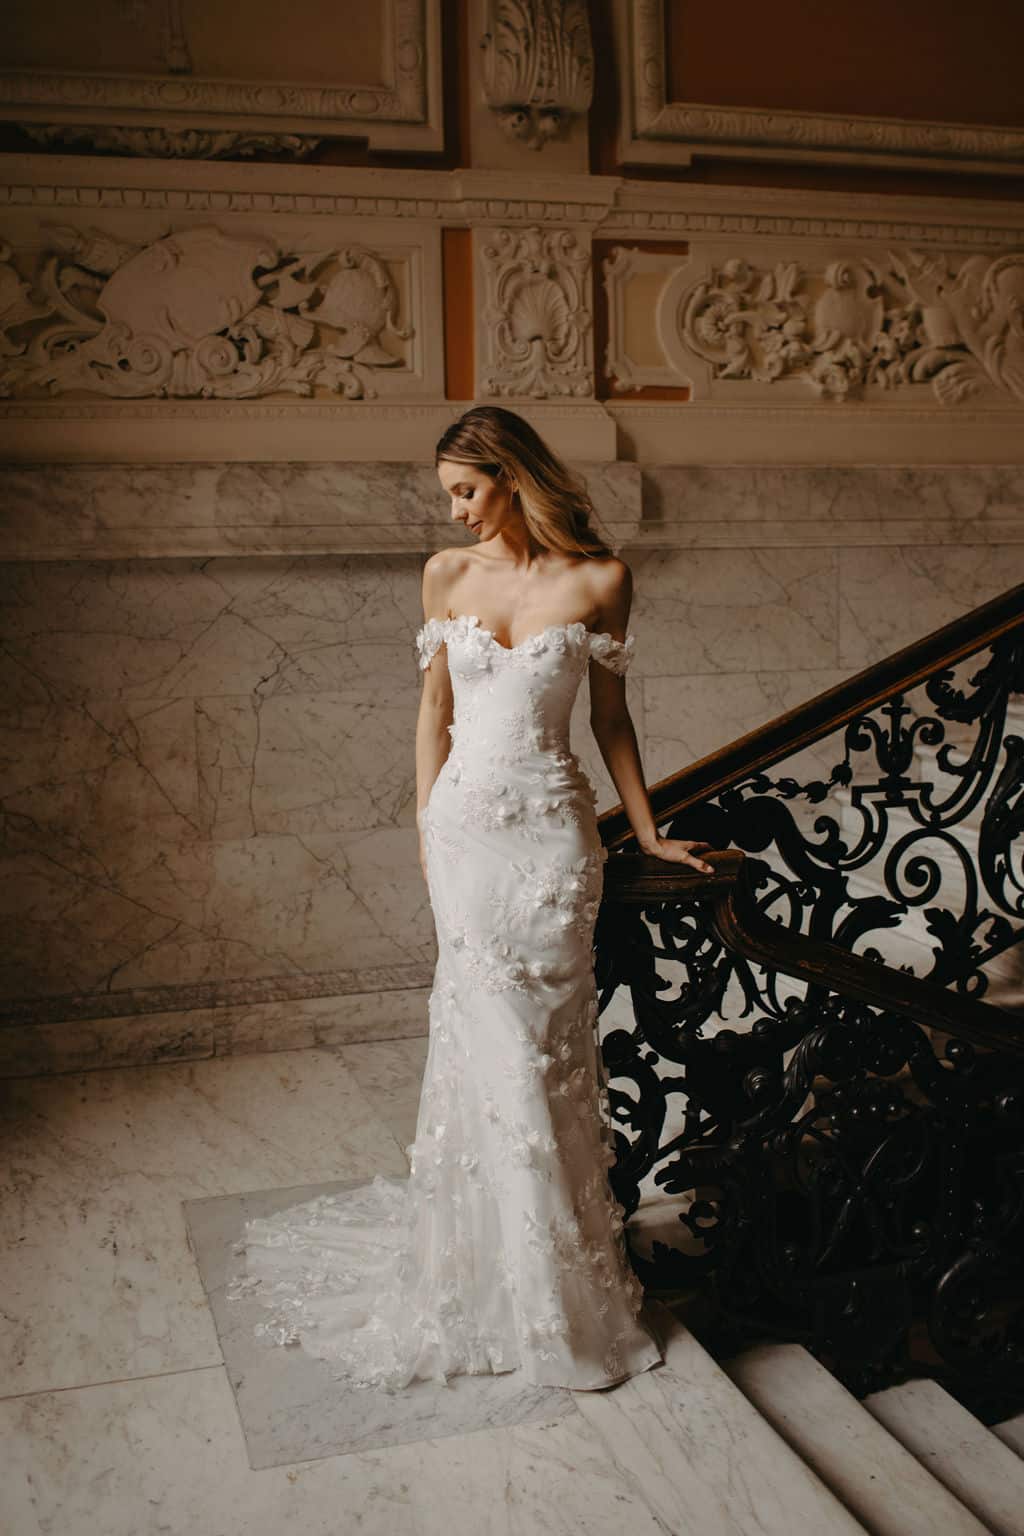 Dreamy Suzanne Neville Debussy wedding gown has a corseted cupped bodice with off the shoulder floral straps and a fitted skirt in our pretty Debussy floral tulle. Find your wedding dress at Your Dream Bridal in near Boston.